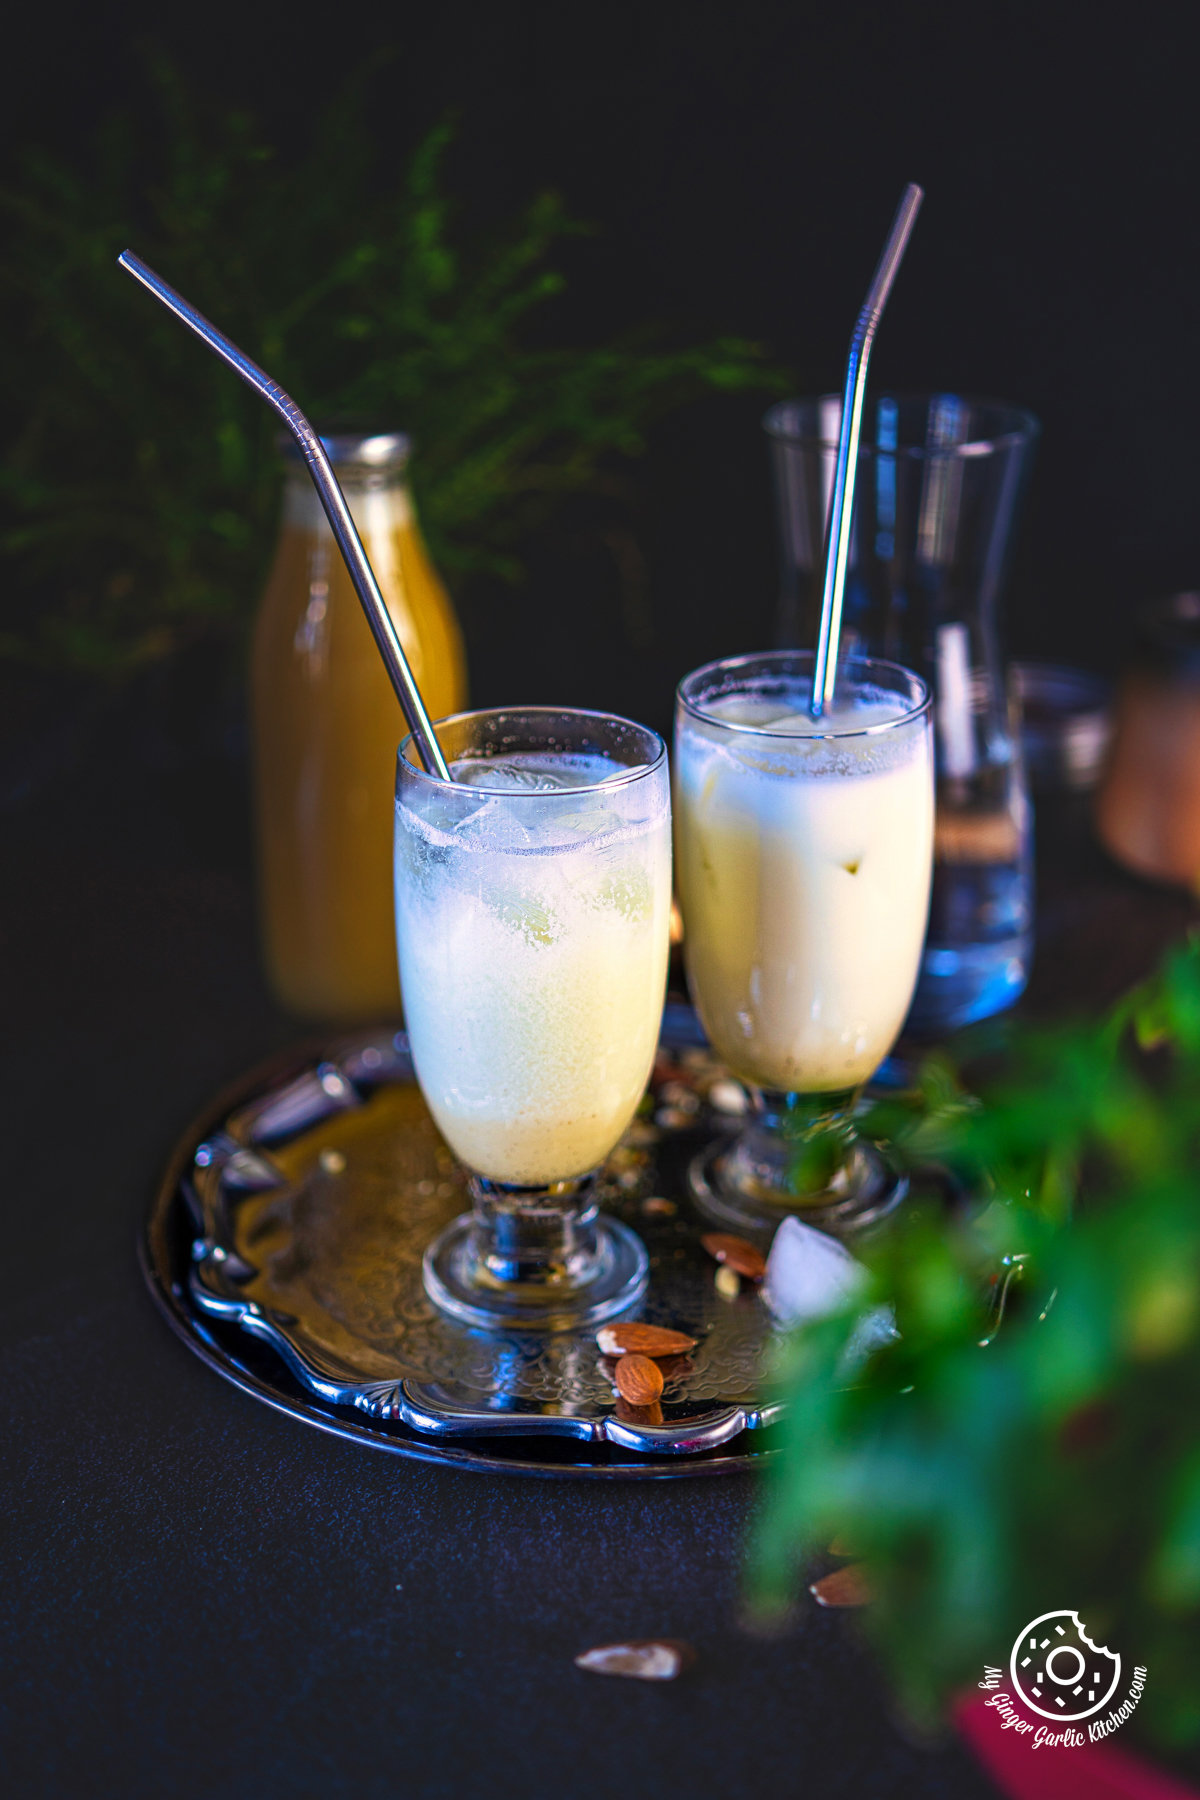 photo of two glasses of a badam sharbat drink with straws on a tray